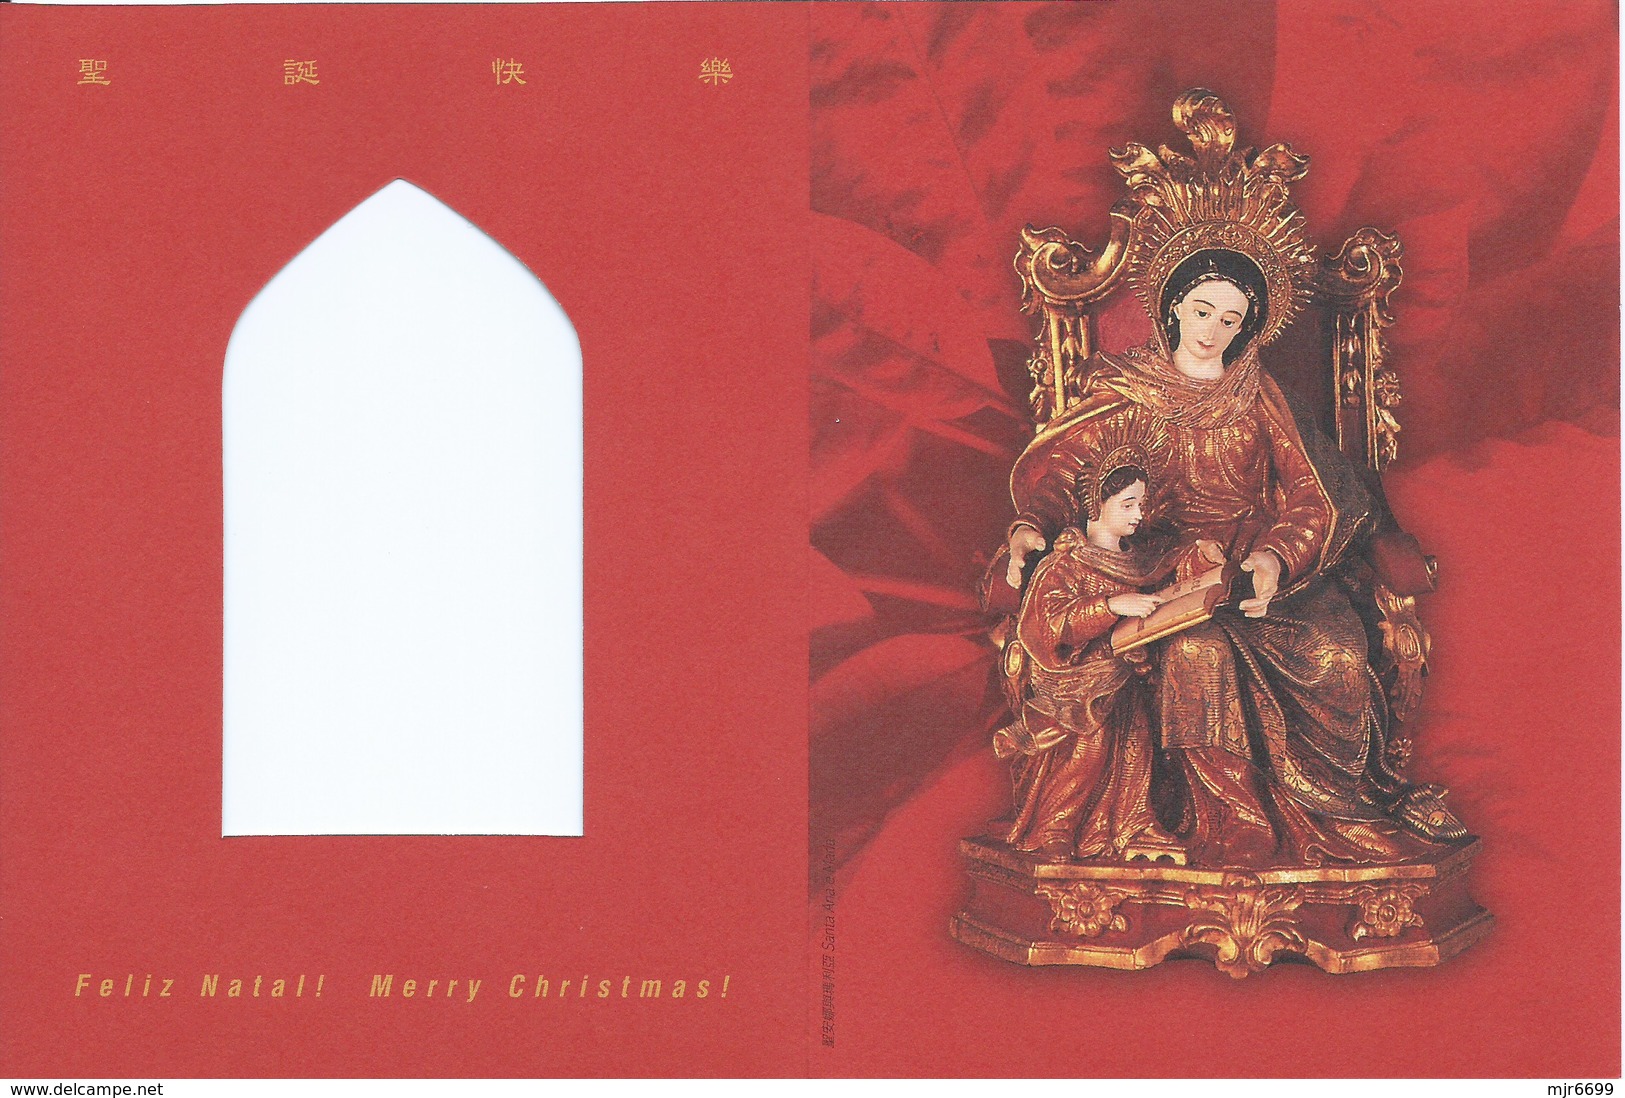 MACAU 2000 CHRISTMAS GREETING CARD & POSTAGE PAID COVER, LOCAL USAGE. POST OFFICE CODE #BPD001 - Postal Stationery